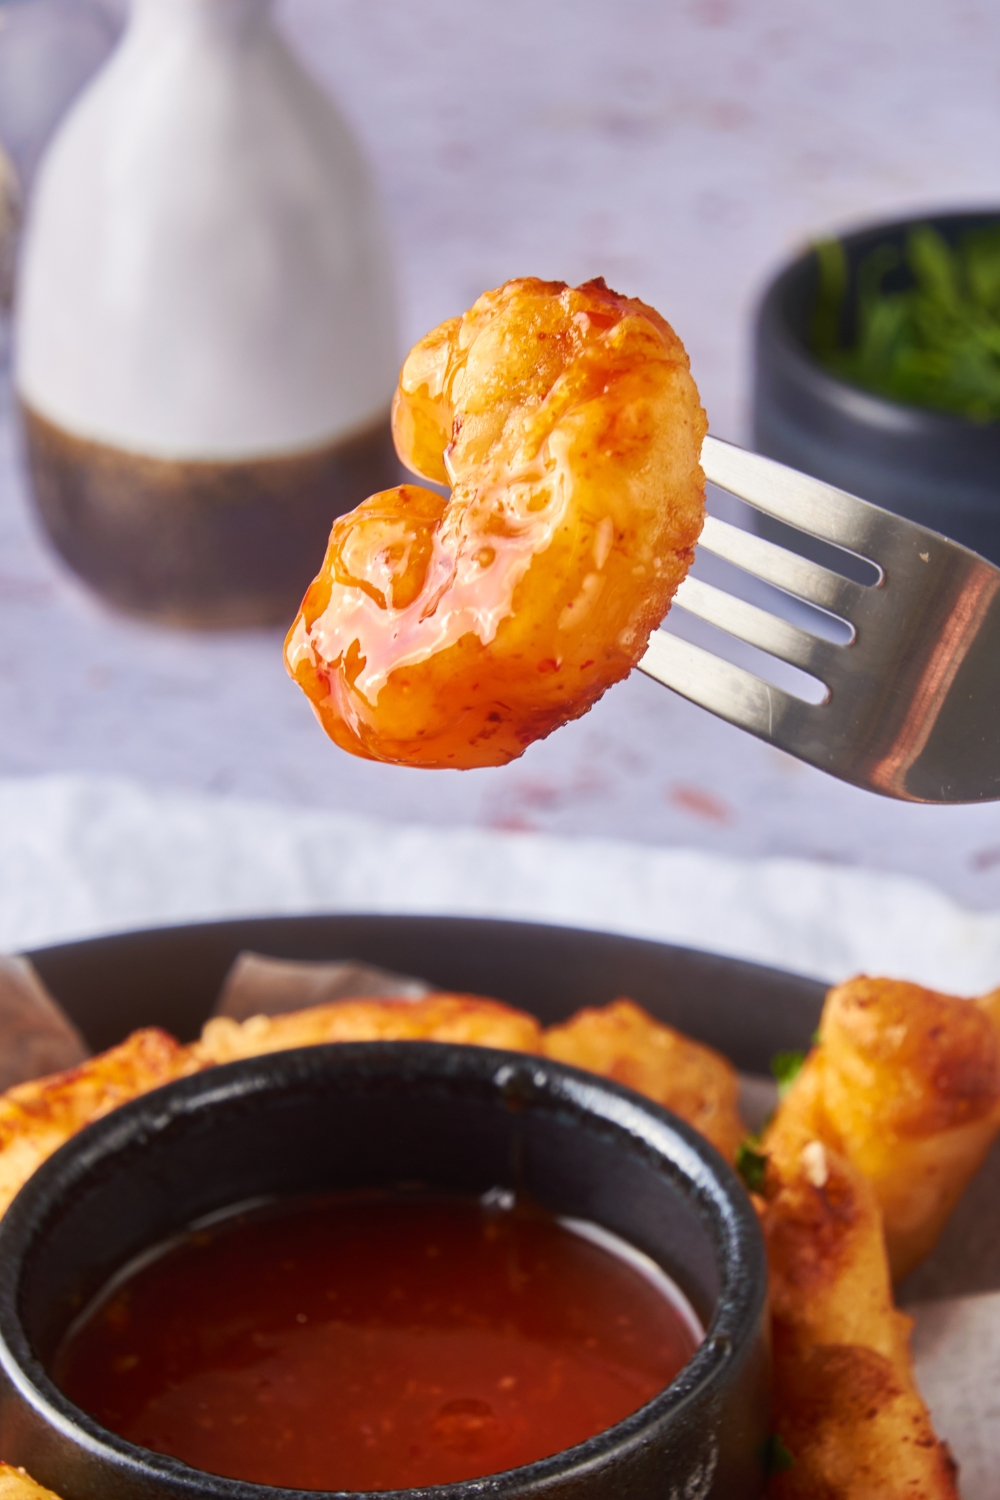 A fork holding a piece of fried shrimp coated in sweet and sour sauce.